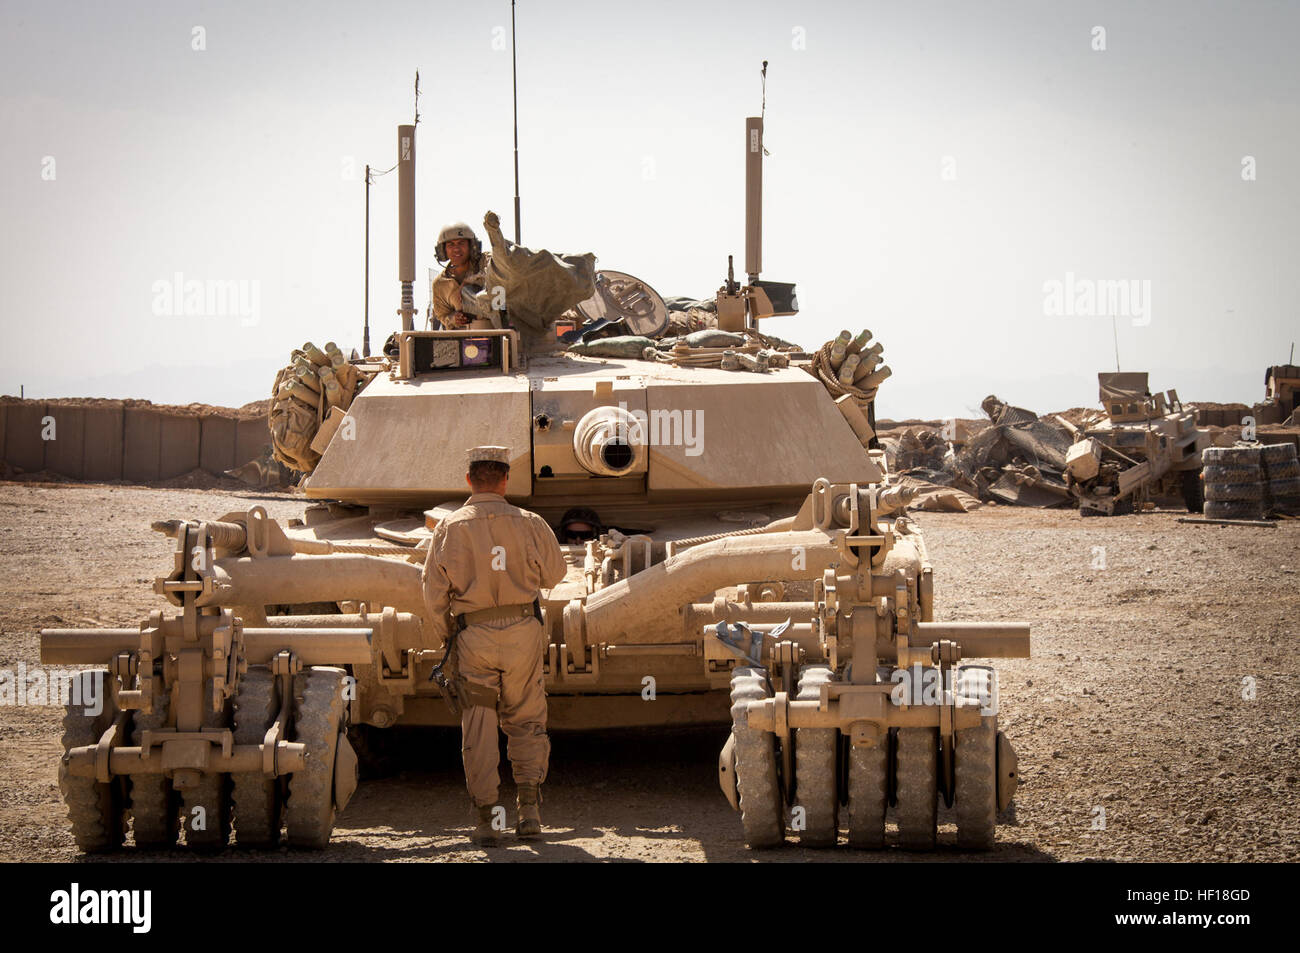 U.S. Marine Corps Staff Sgt. Paul Acevedo, a section leader from Pomona, Calif., assigned to Delta Company, 1st Tank Battalion, Regimental Combat Team 7, (RCT) 7, conducts function checks on an M1A1 Abrams tank on Camp Shir Ghazay, Helmand province, Afghanistan, April 27, 2013. Acevedo alongside the Marines and Sailors of Delta Company deployed to Afghanistan in support of Operation Enduring Freedom. (U.S. Marine Corps photo by Staff Sgt. Ezekiel R. Kitandwe/Released) Delta Company tanks roll through Shir Ghazay 130427-M-RO295-075 Stock Photo